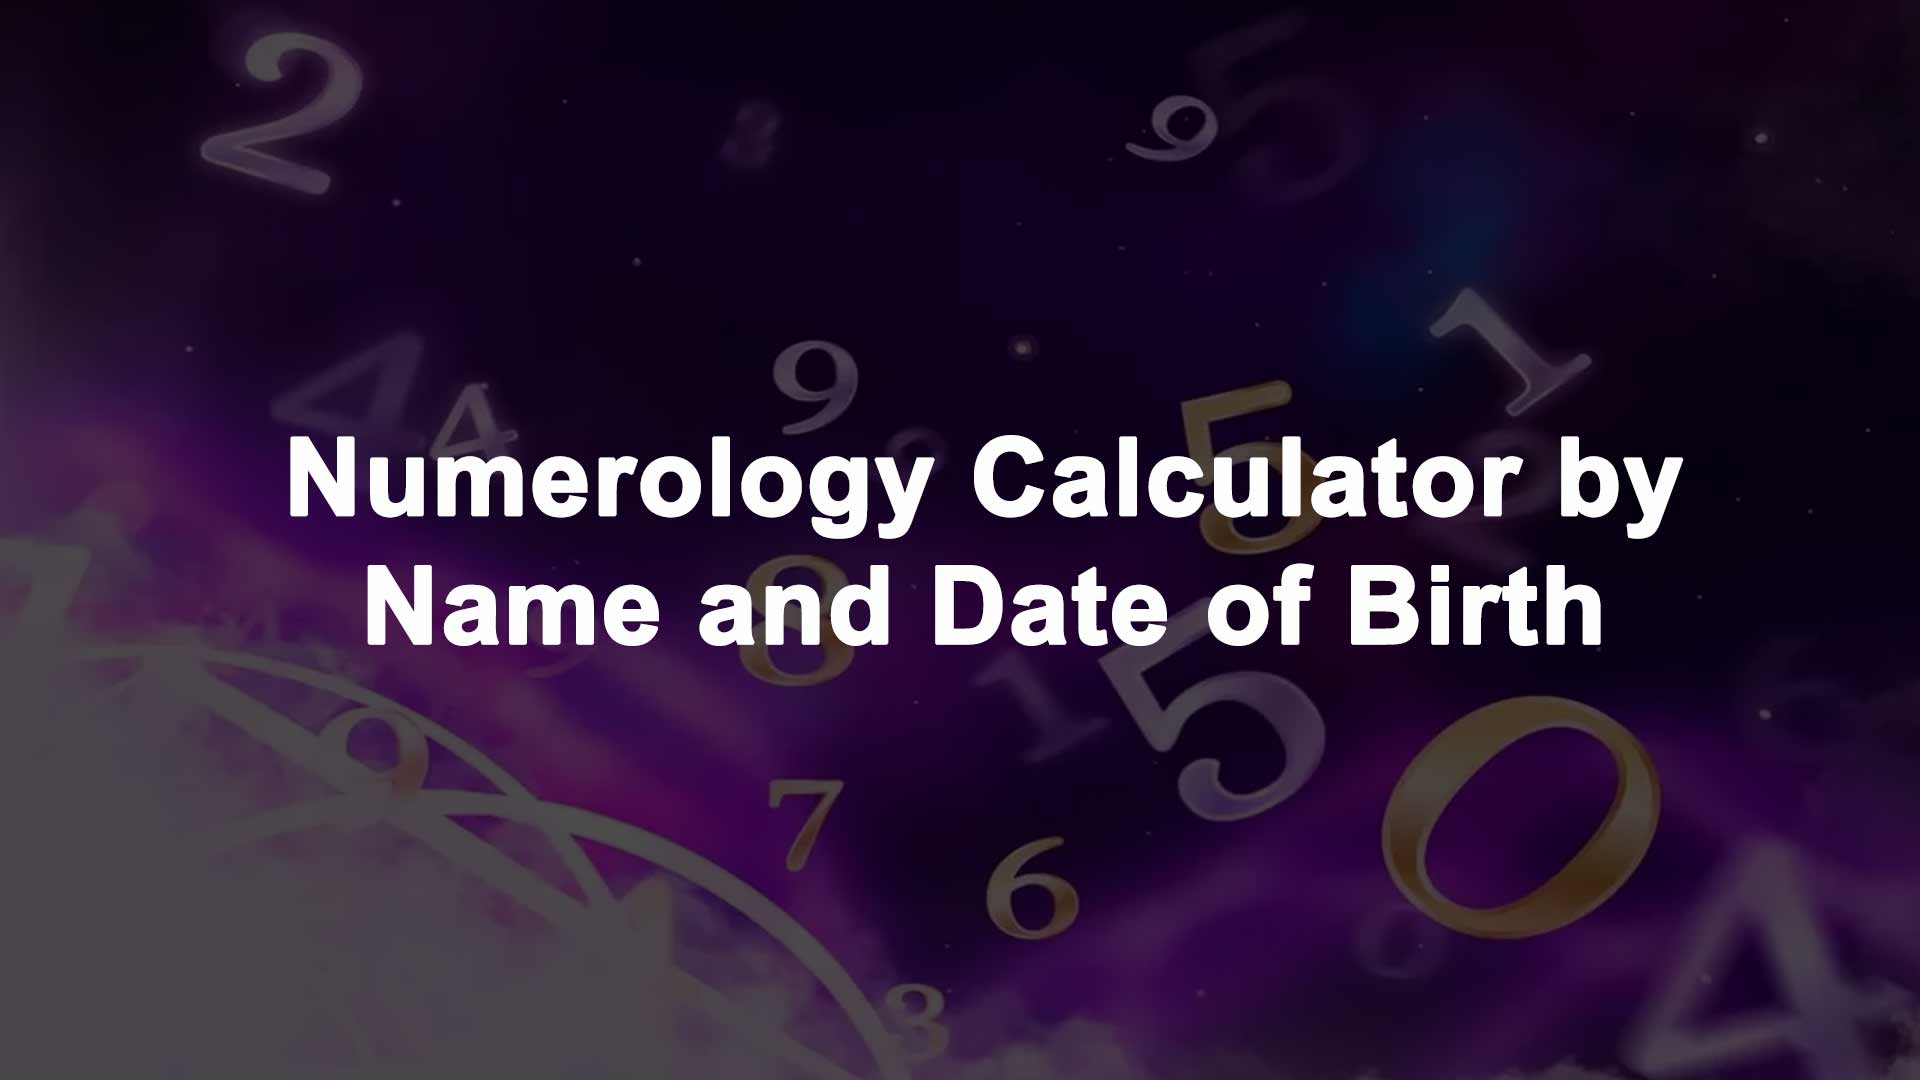 Numerology Calculator by Name and Date of Birth